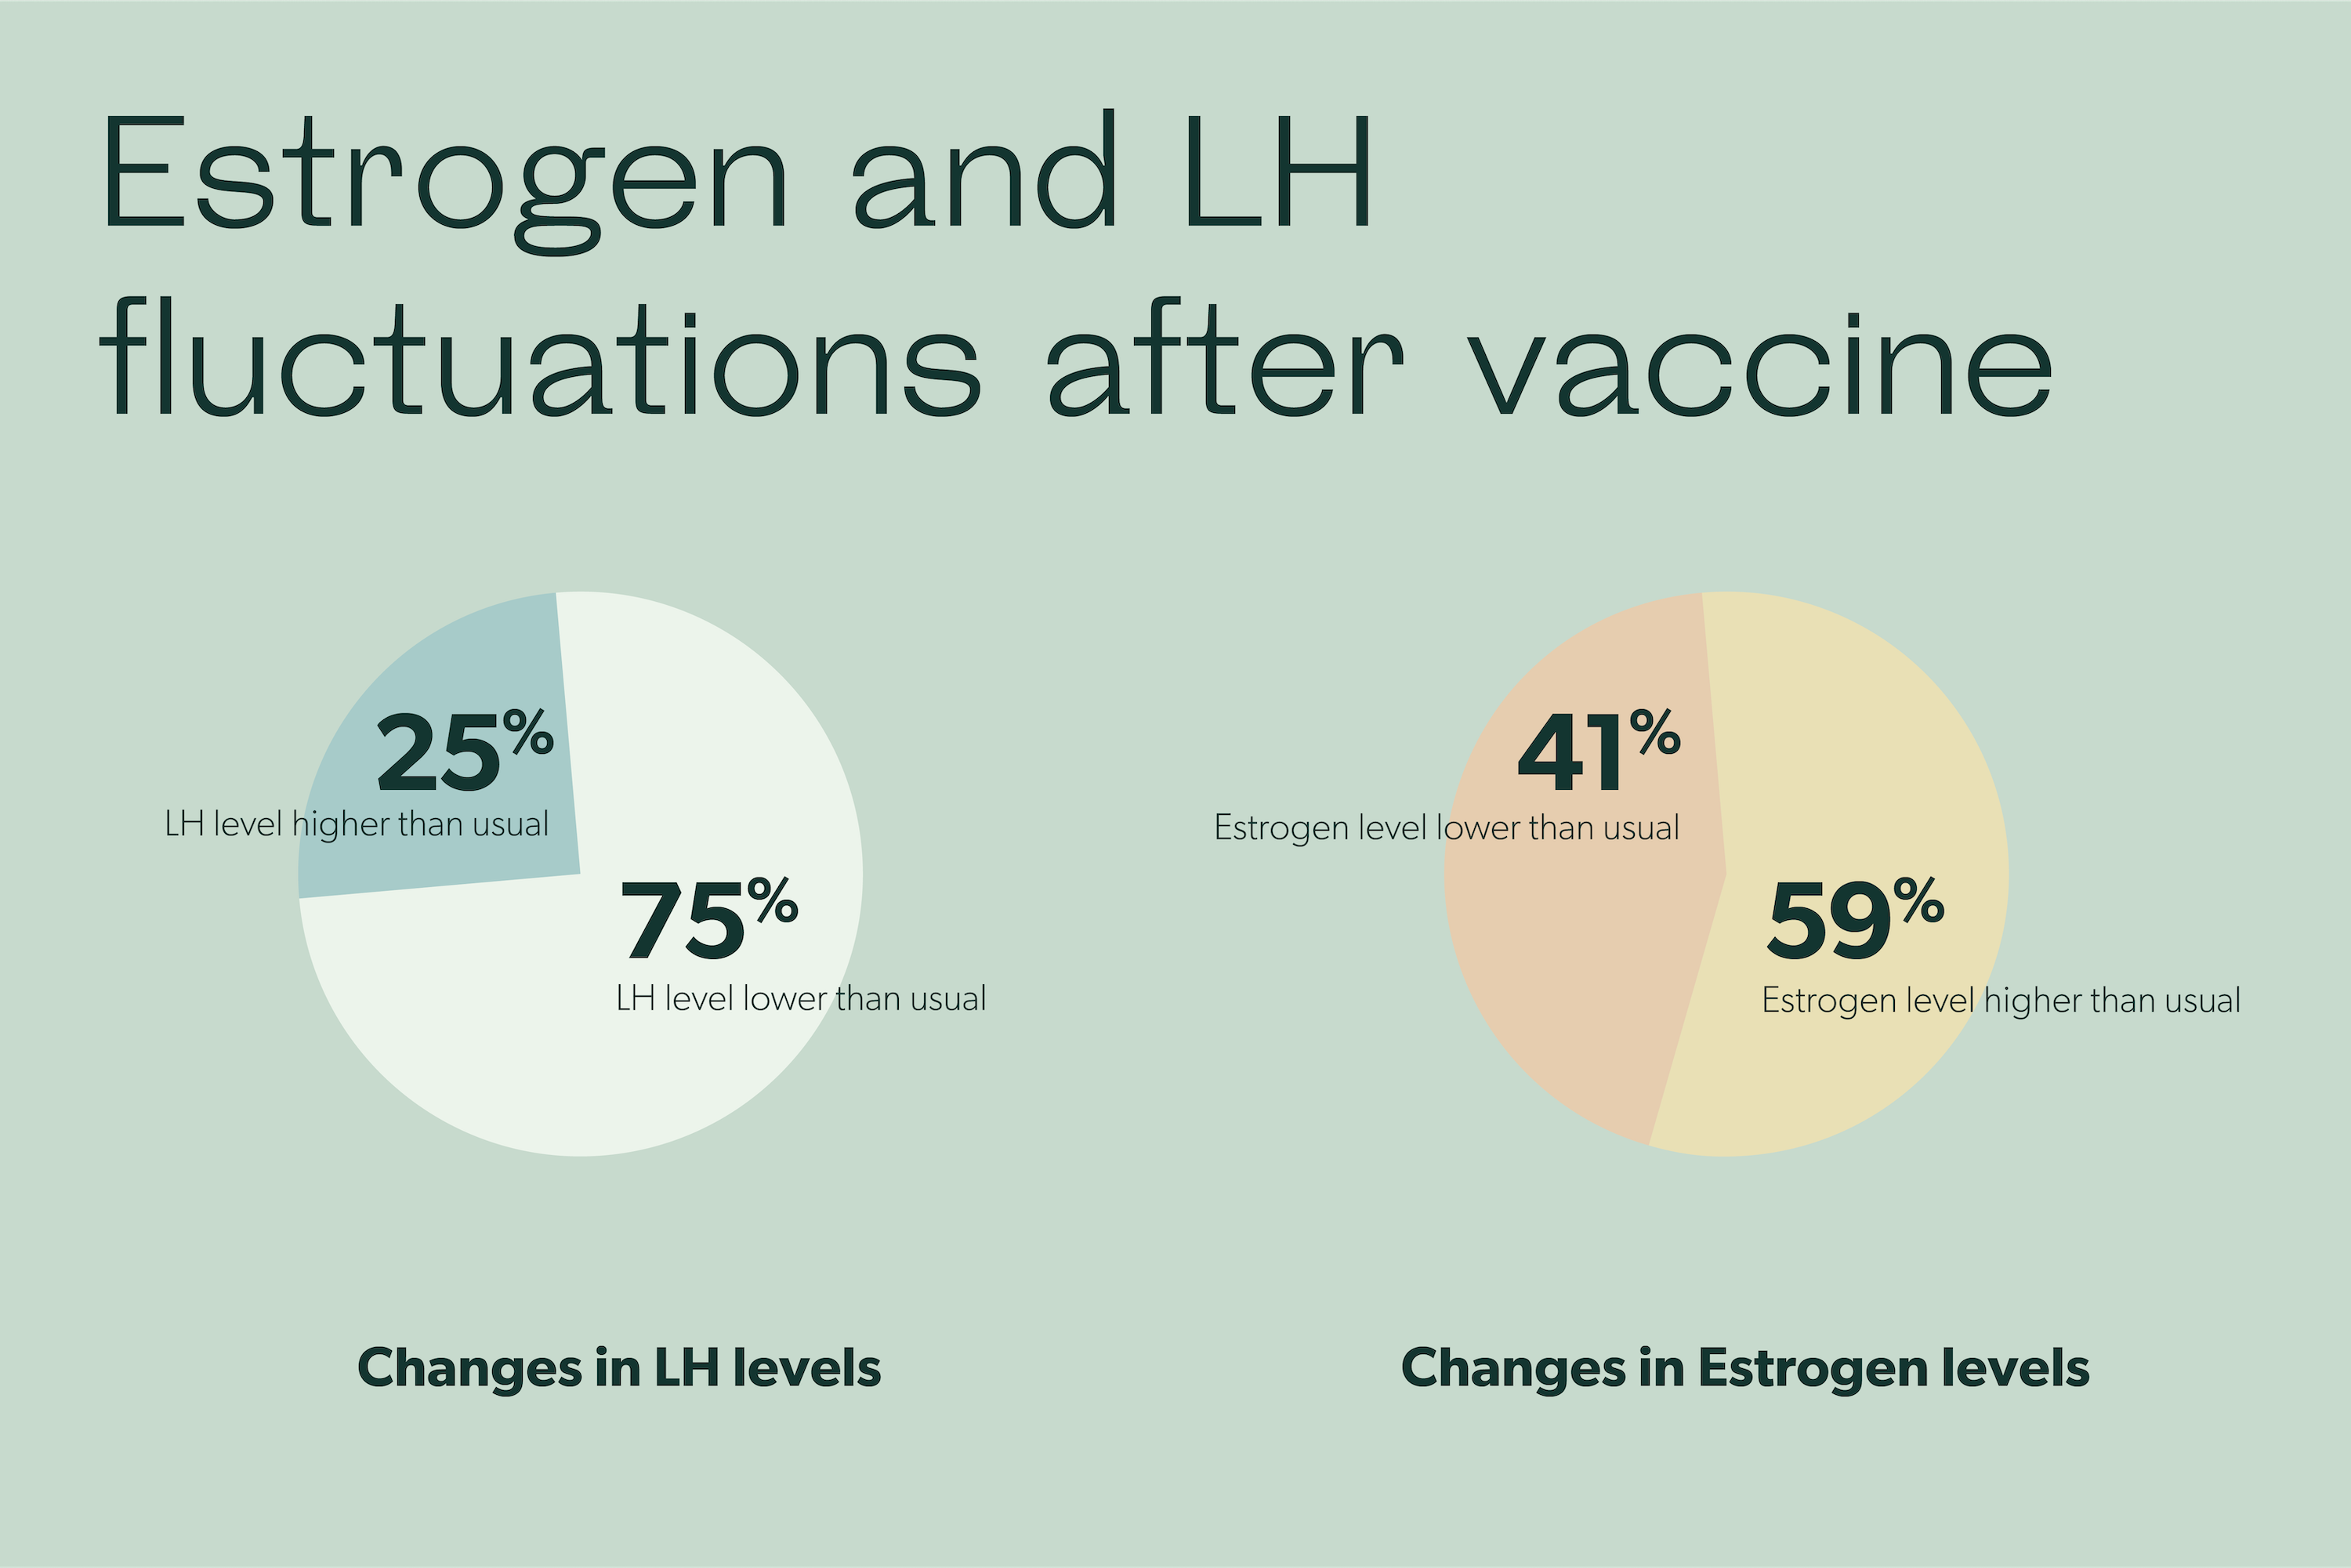 Estrogen and LH fluctuations after vaccine